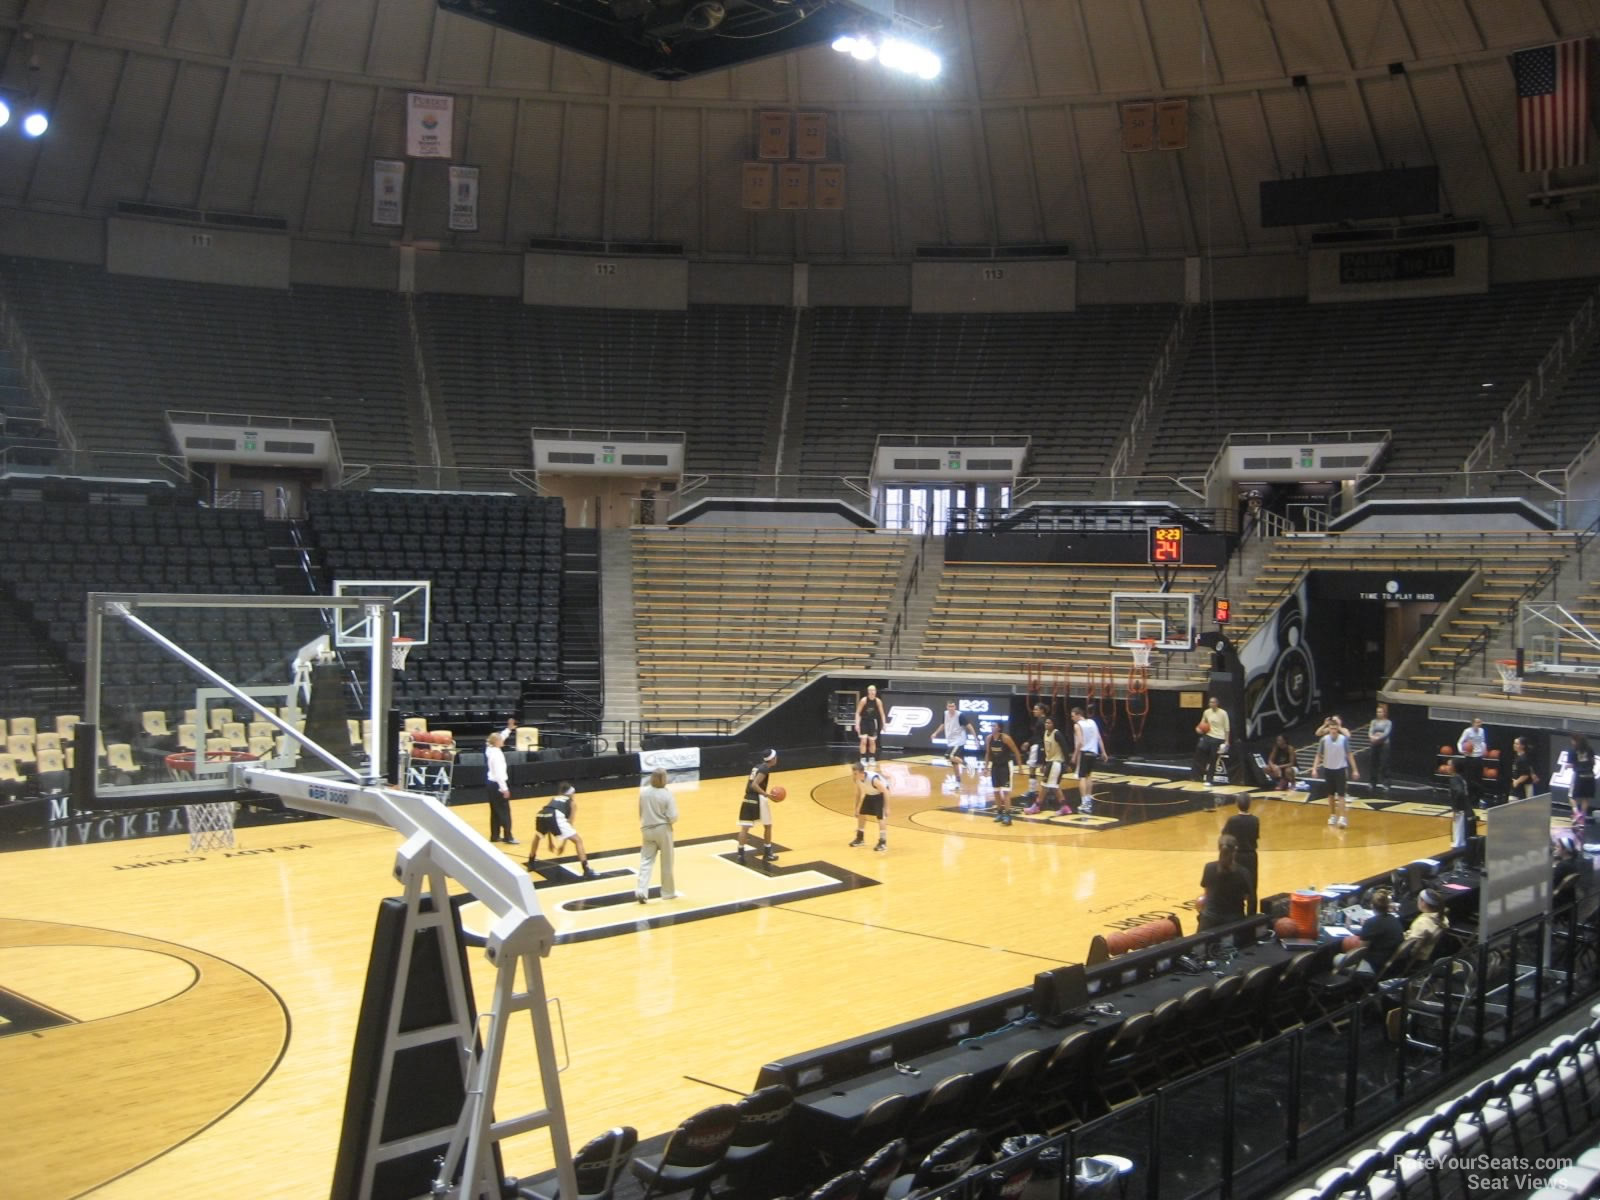 section 3, row 10 seat view  - mackey arena